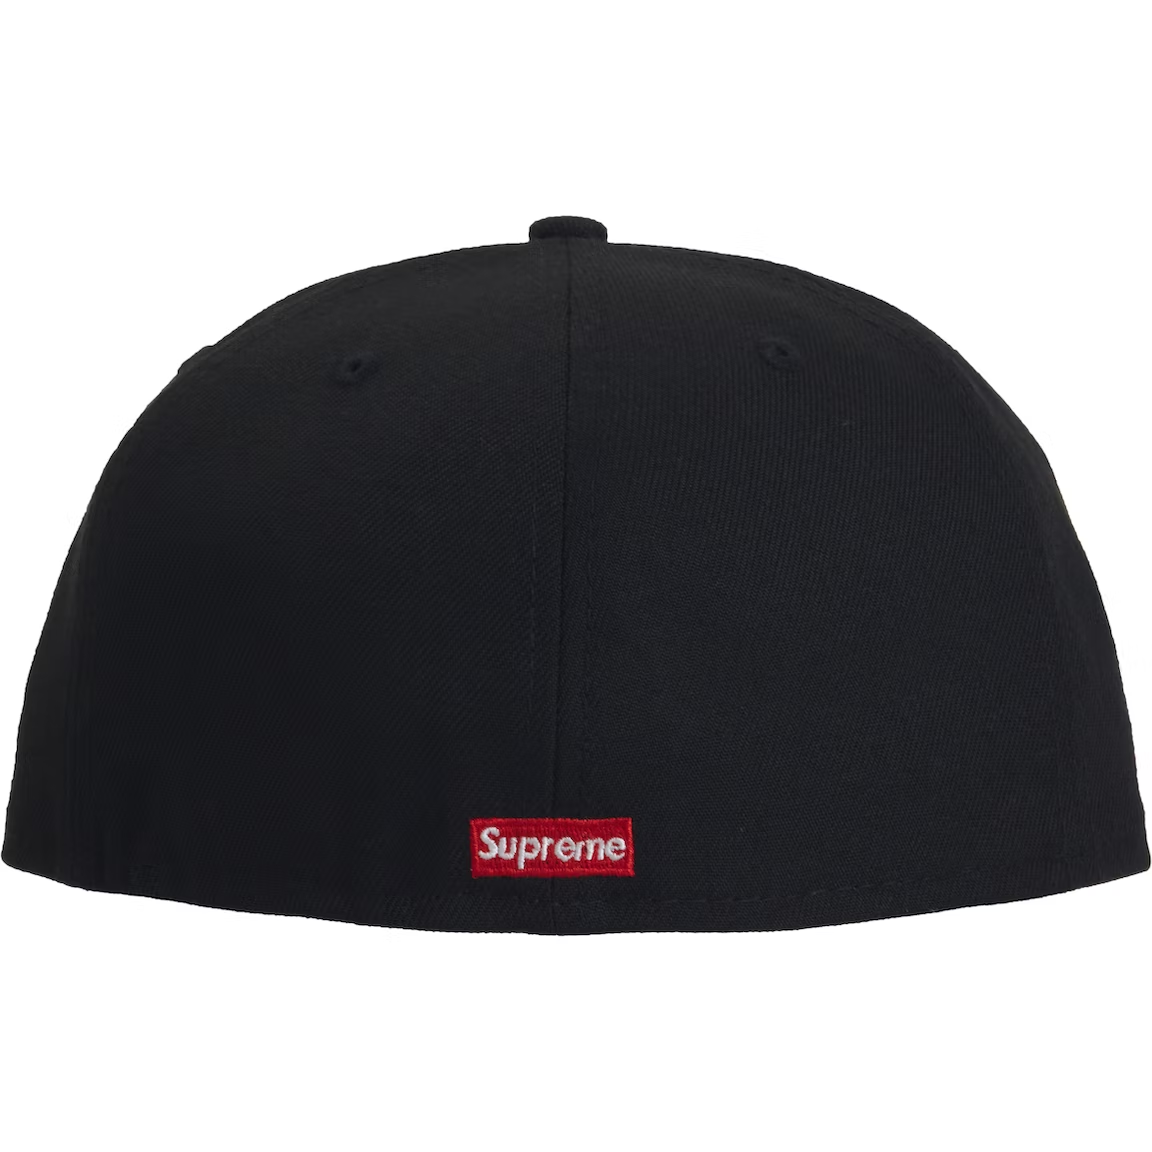 Supreme x New Era Skull Black Fitted Hat Size 7 1/8 – WyCo Vintage 